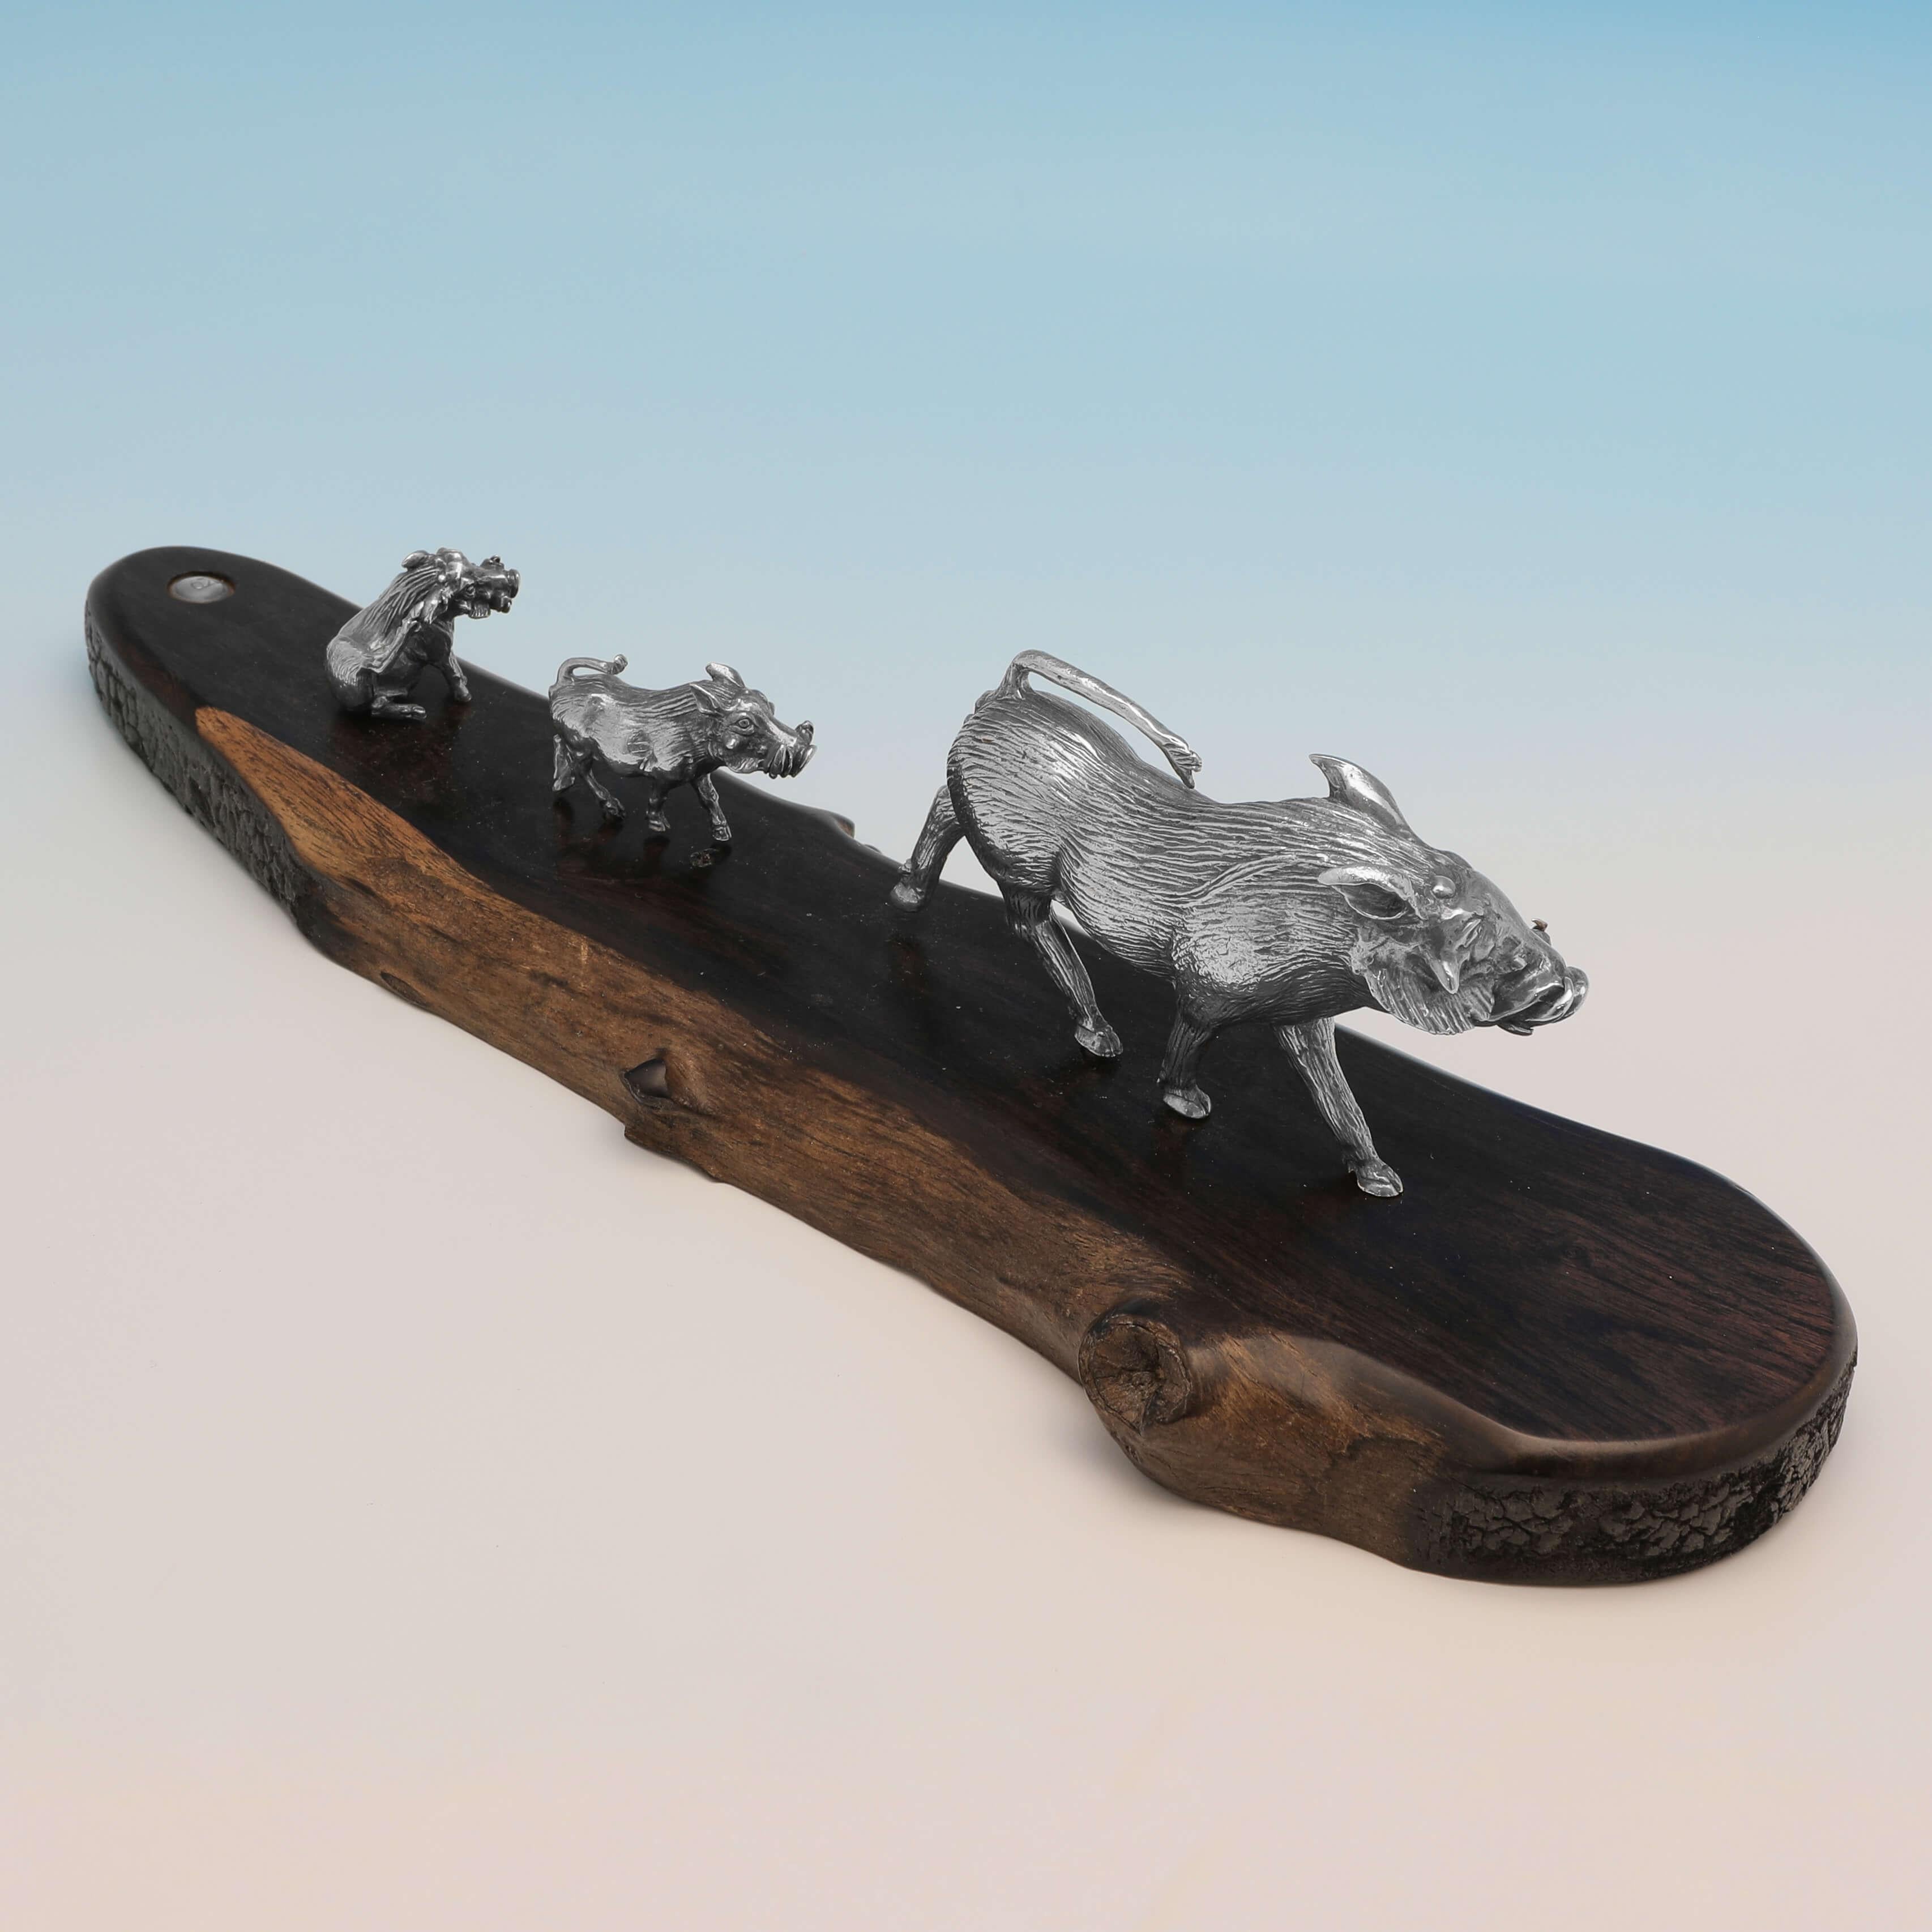 Made circa 2000 by Patrick Mavros, this charming, Sterling Silver Model of a Warthog Family, stands on wooden base, and in total measures 2.5